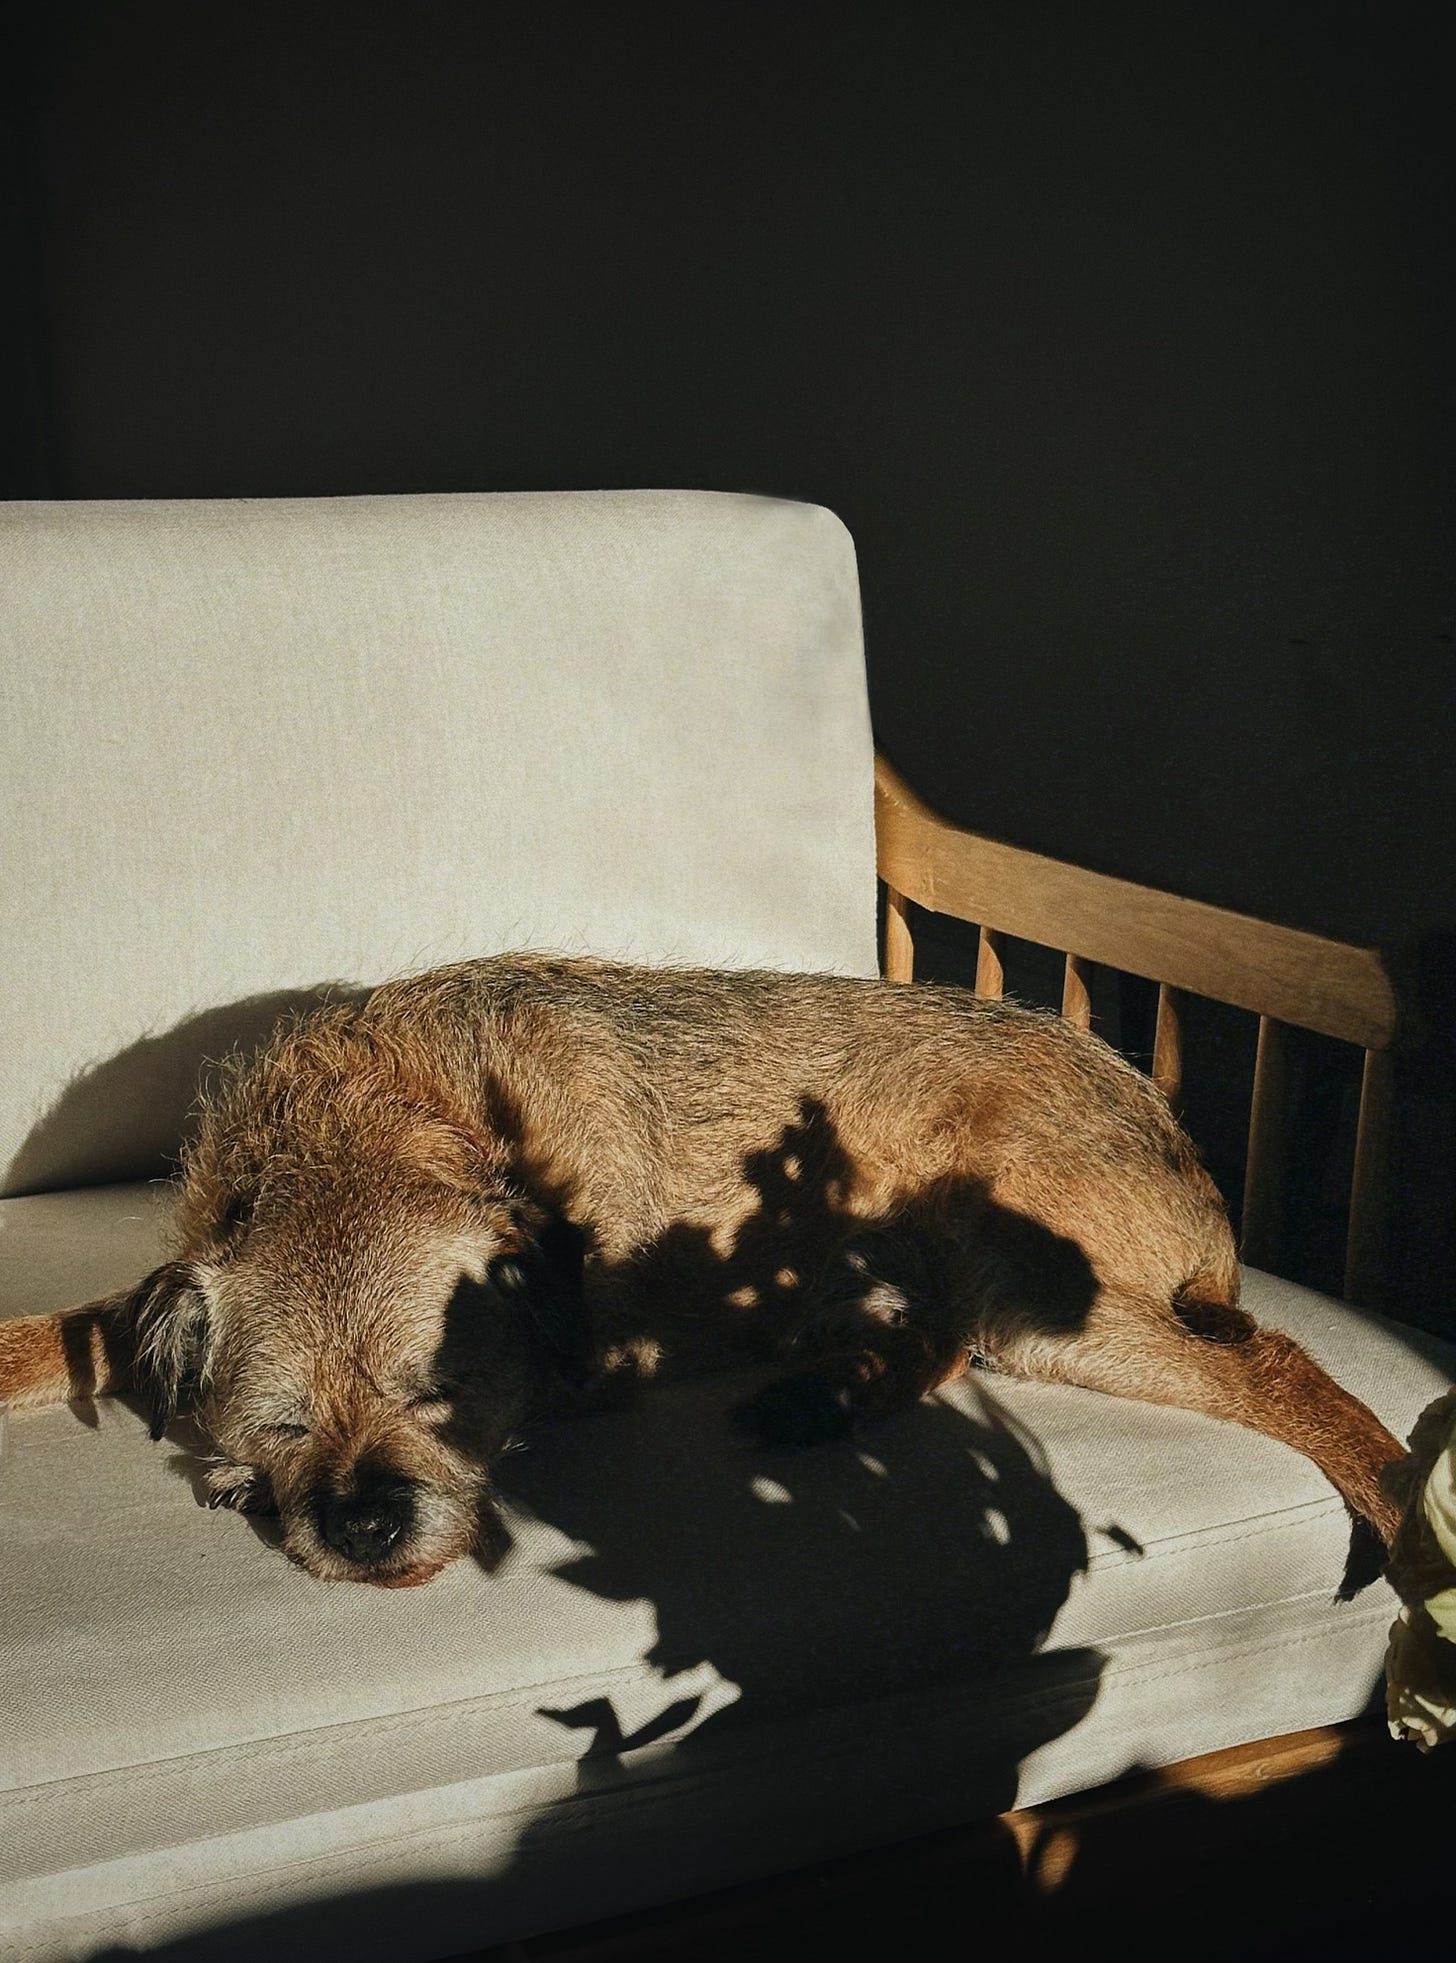 my dog Monty, a border terrier, lying on a white sofa in a patch of sun. Some flowers off-camera cast a shadow over the scene.